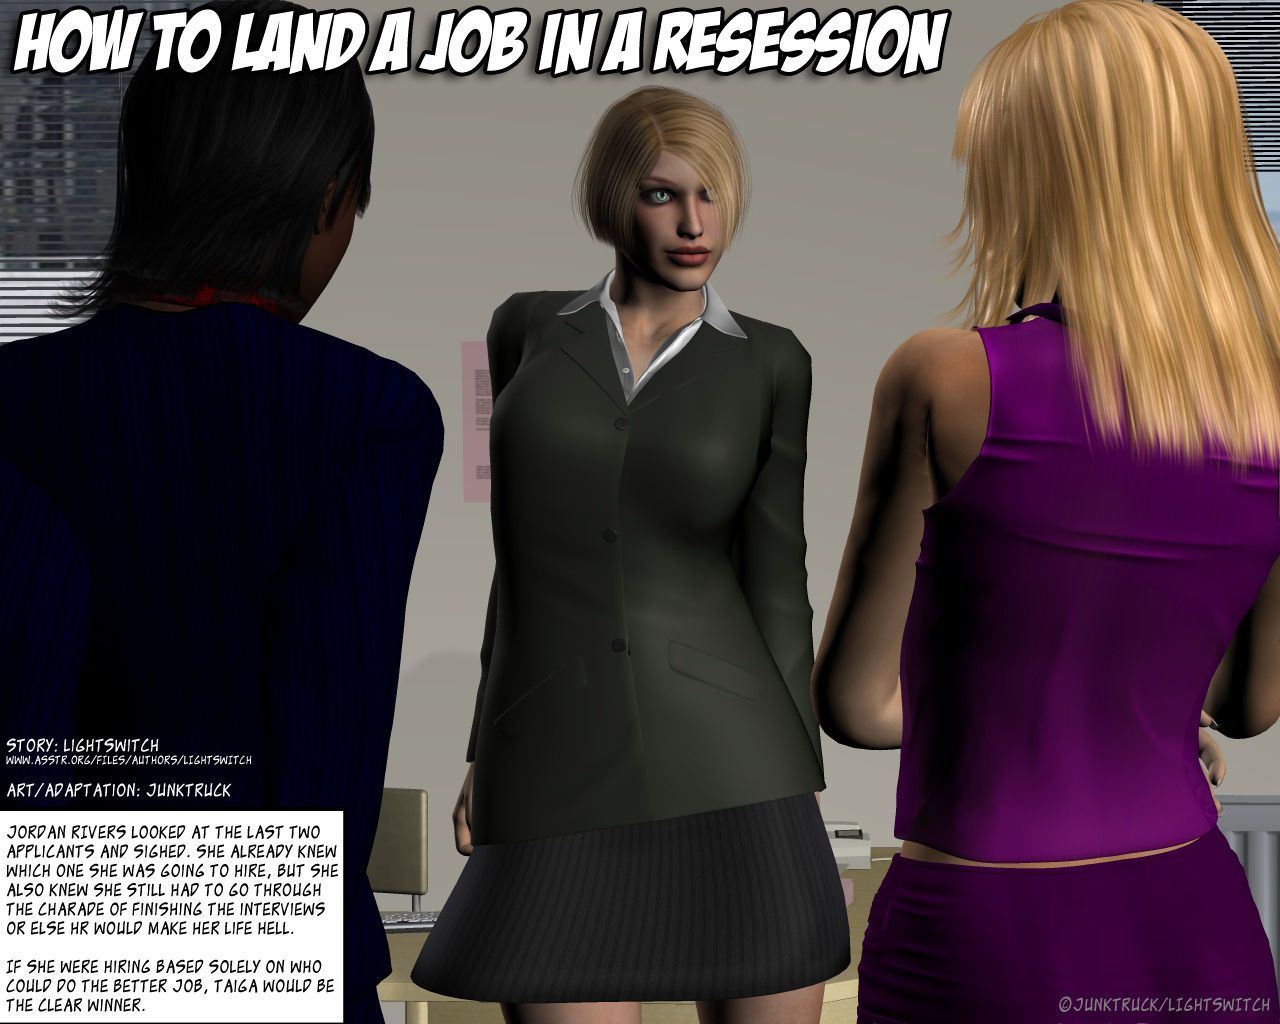 How to Land a Job During a Recession